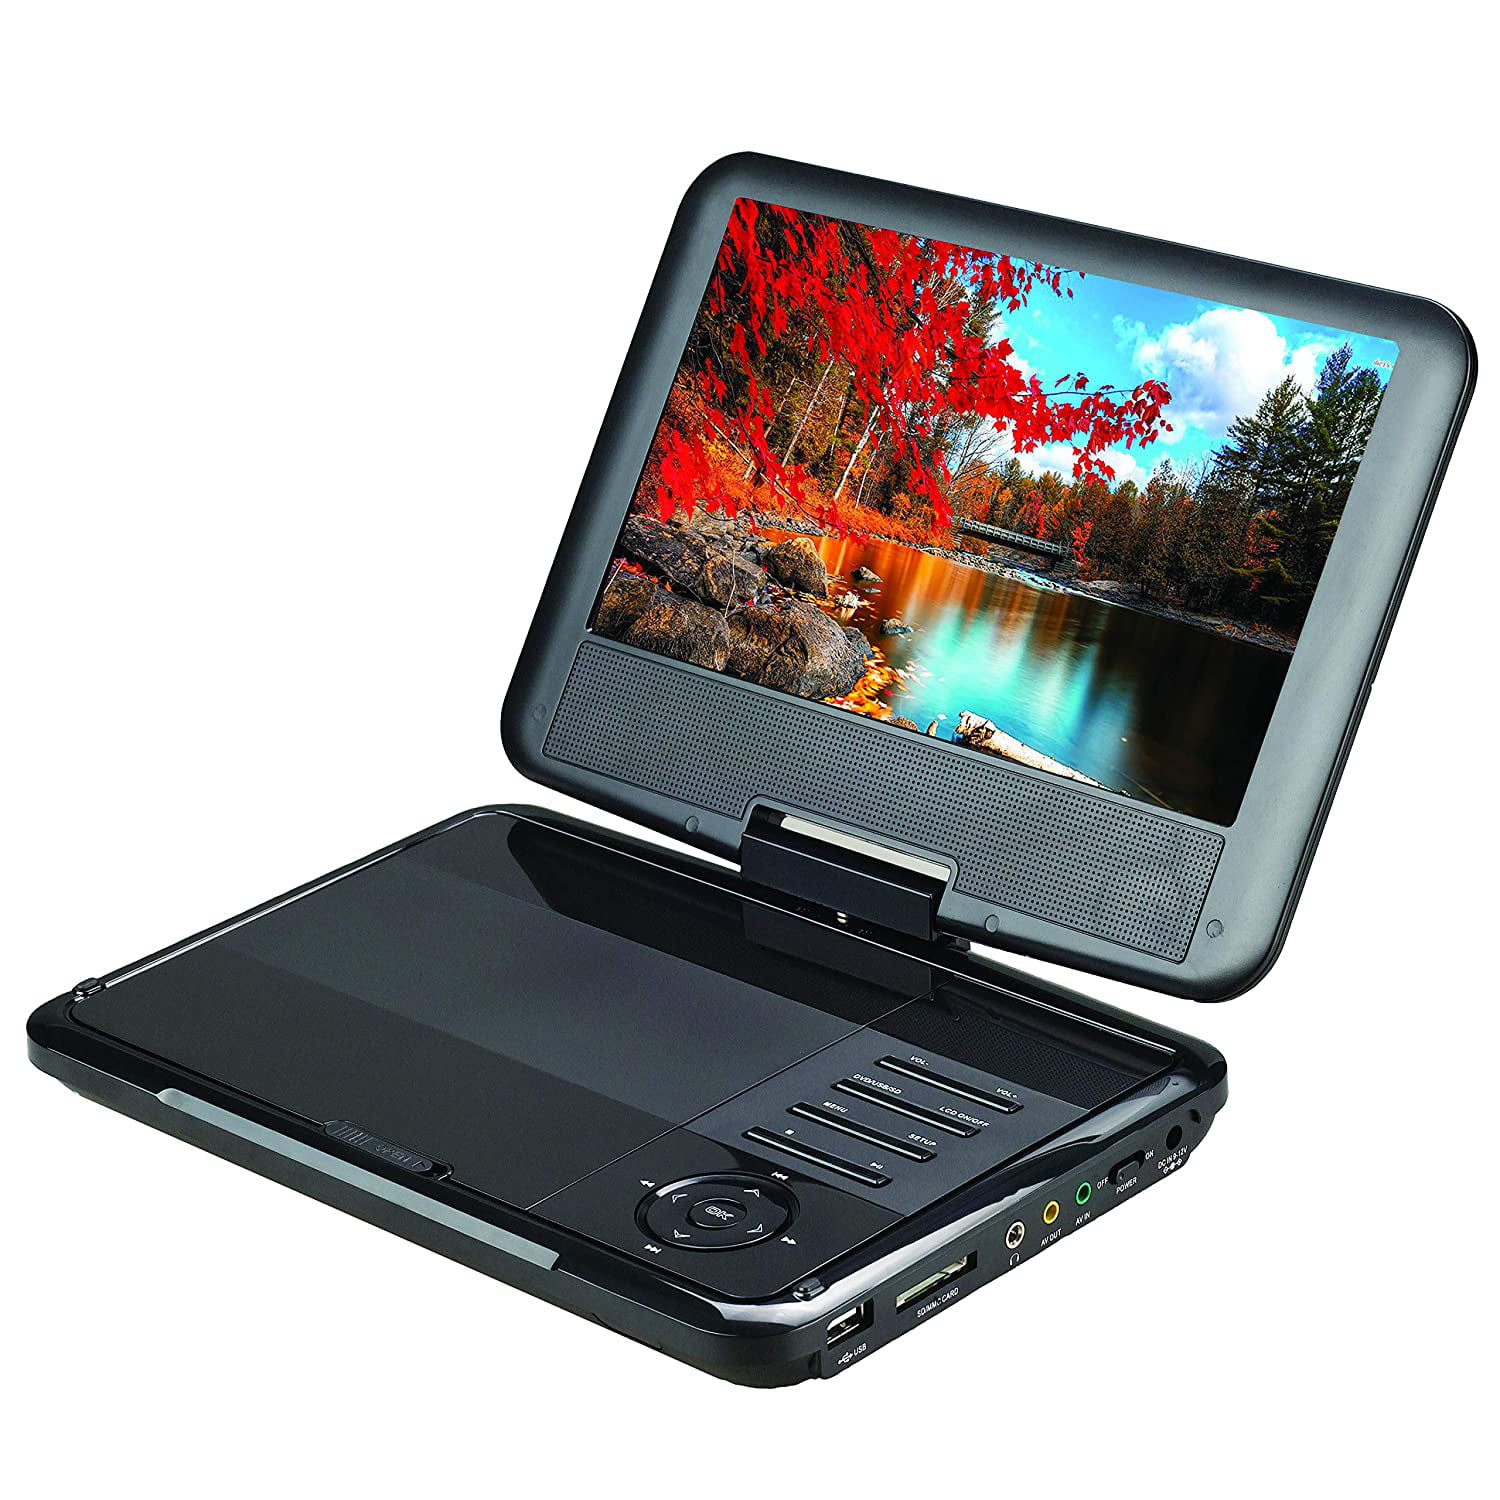 SuperSonic SC-179 Portable DVD Player 9